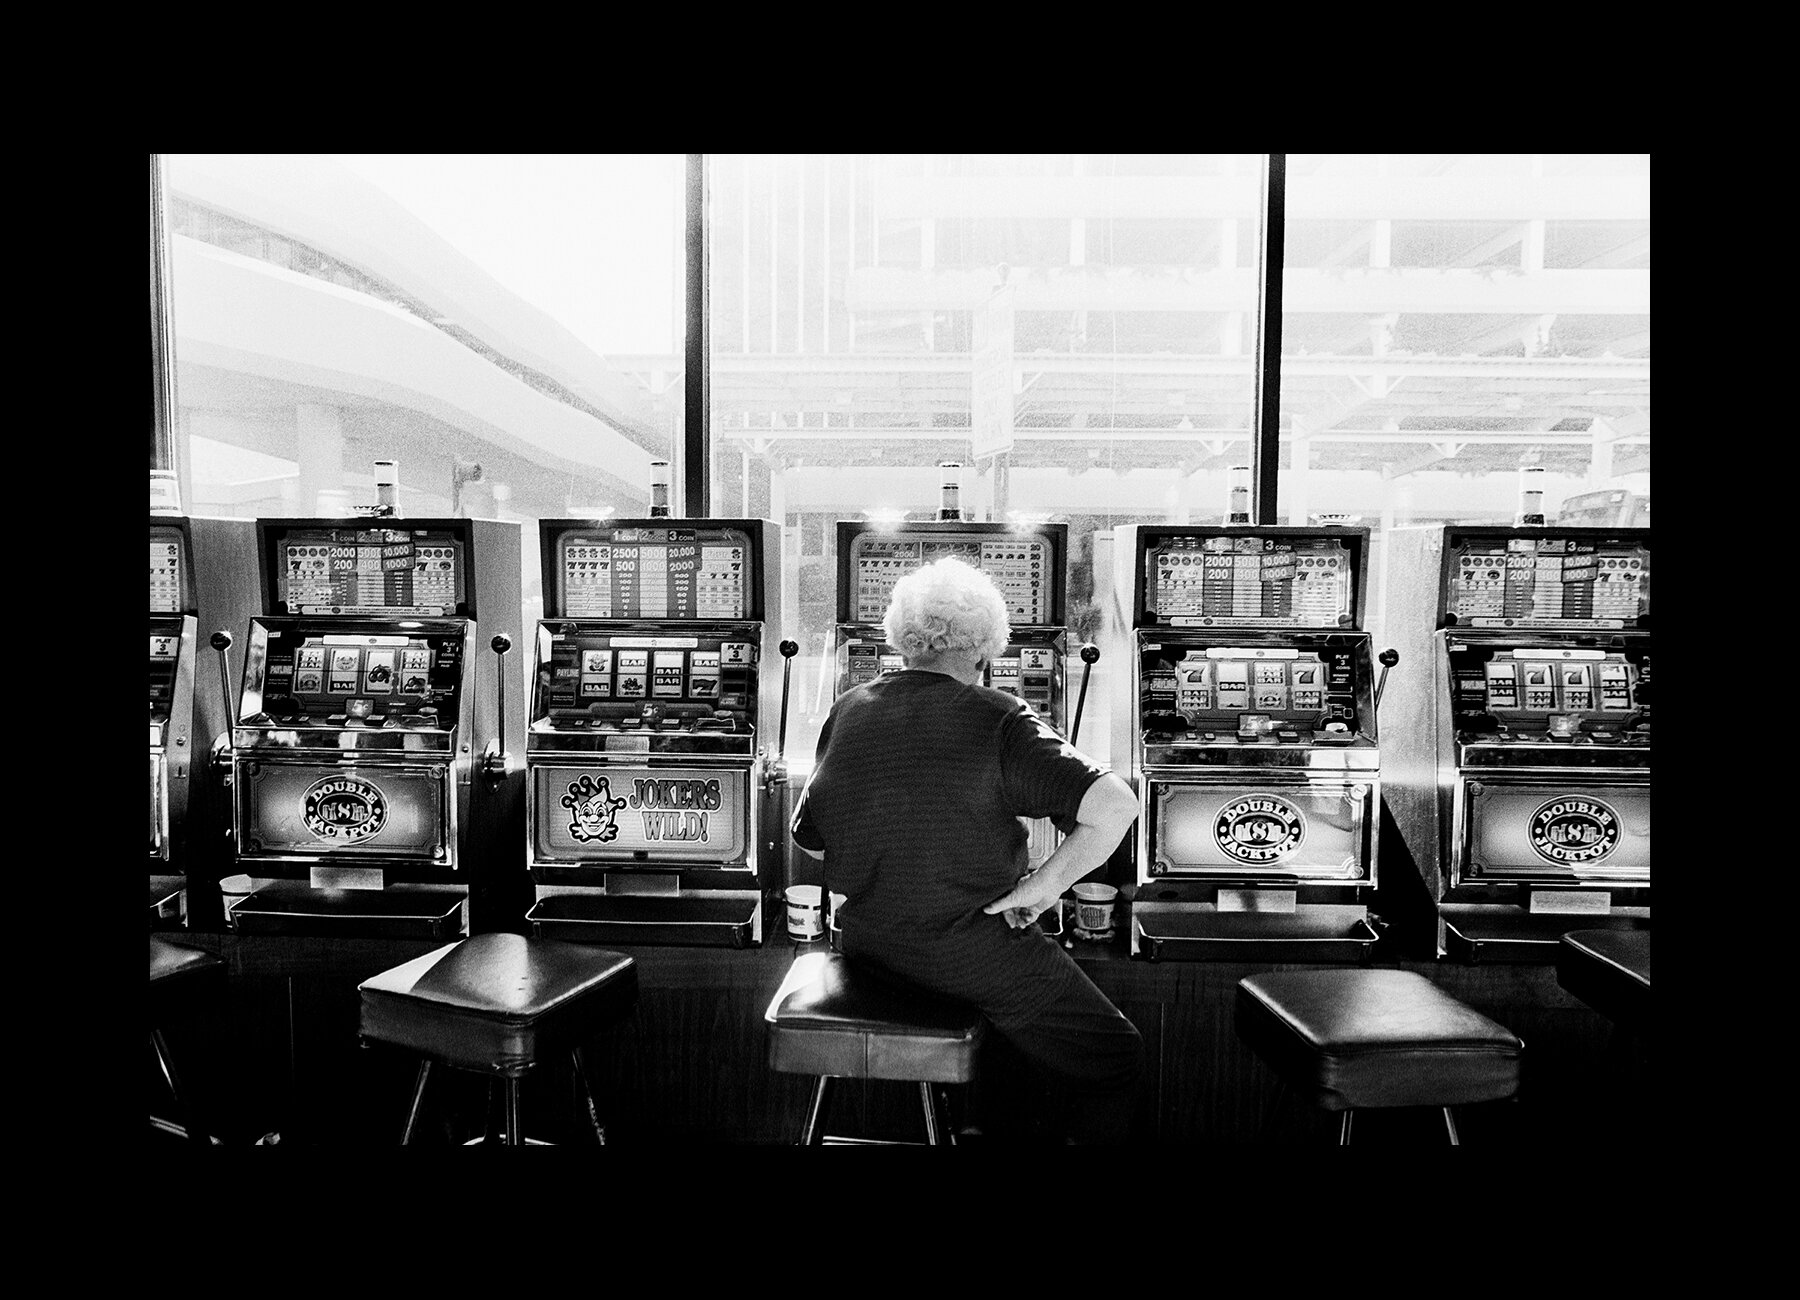  A woman plays on the slot machines on a gaming tour in Reno, Nevada. 2000 